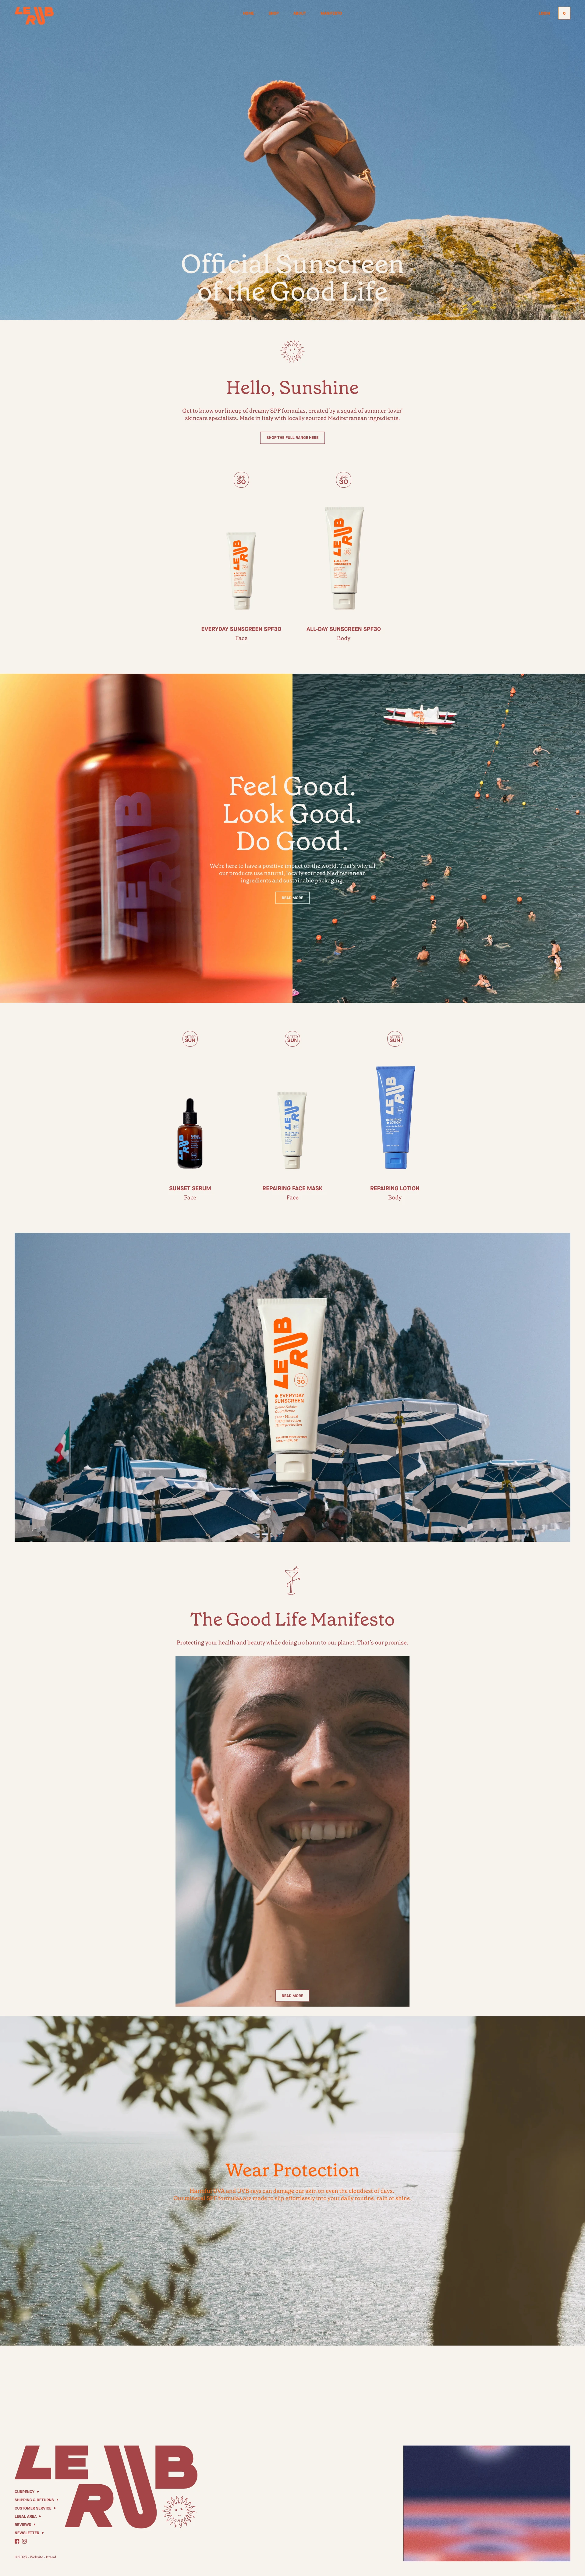 Le Rub Landing Page Example: Official Sunscreen of the Good Life. Luxury without limits. Weekday. Vacation day. Every day.